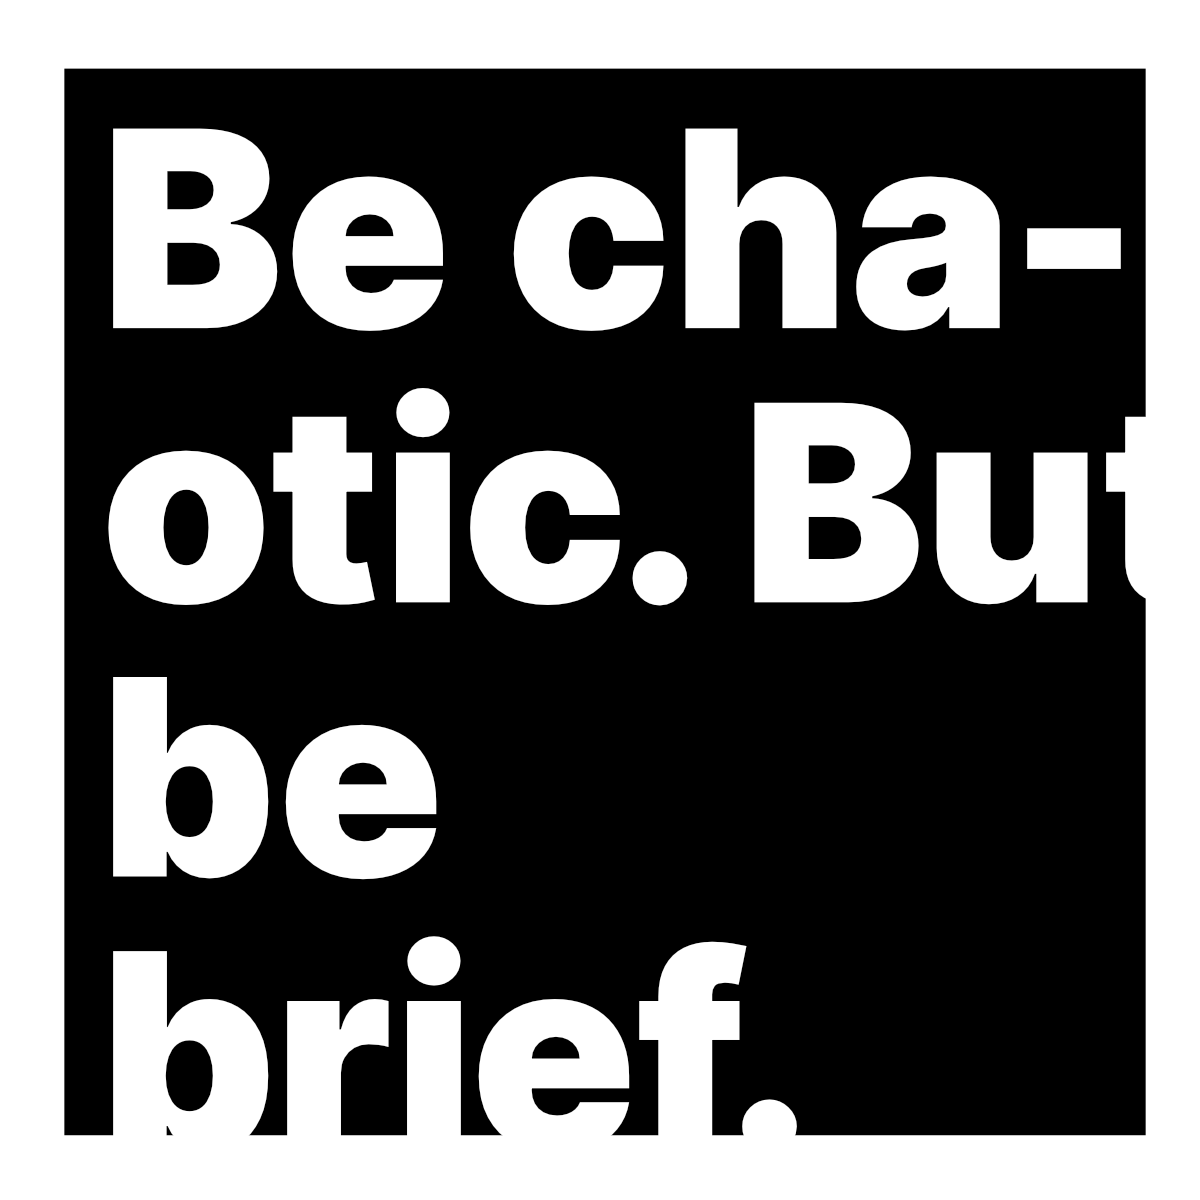 Be chaotic. But be brief.